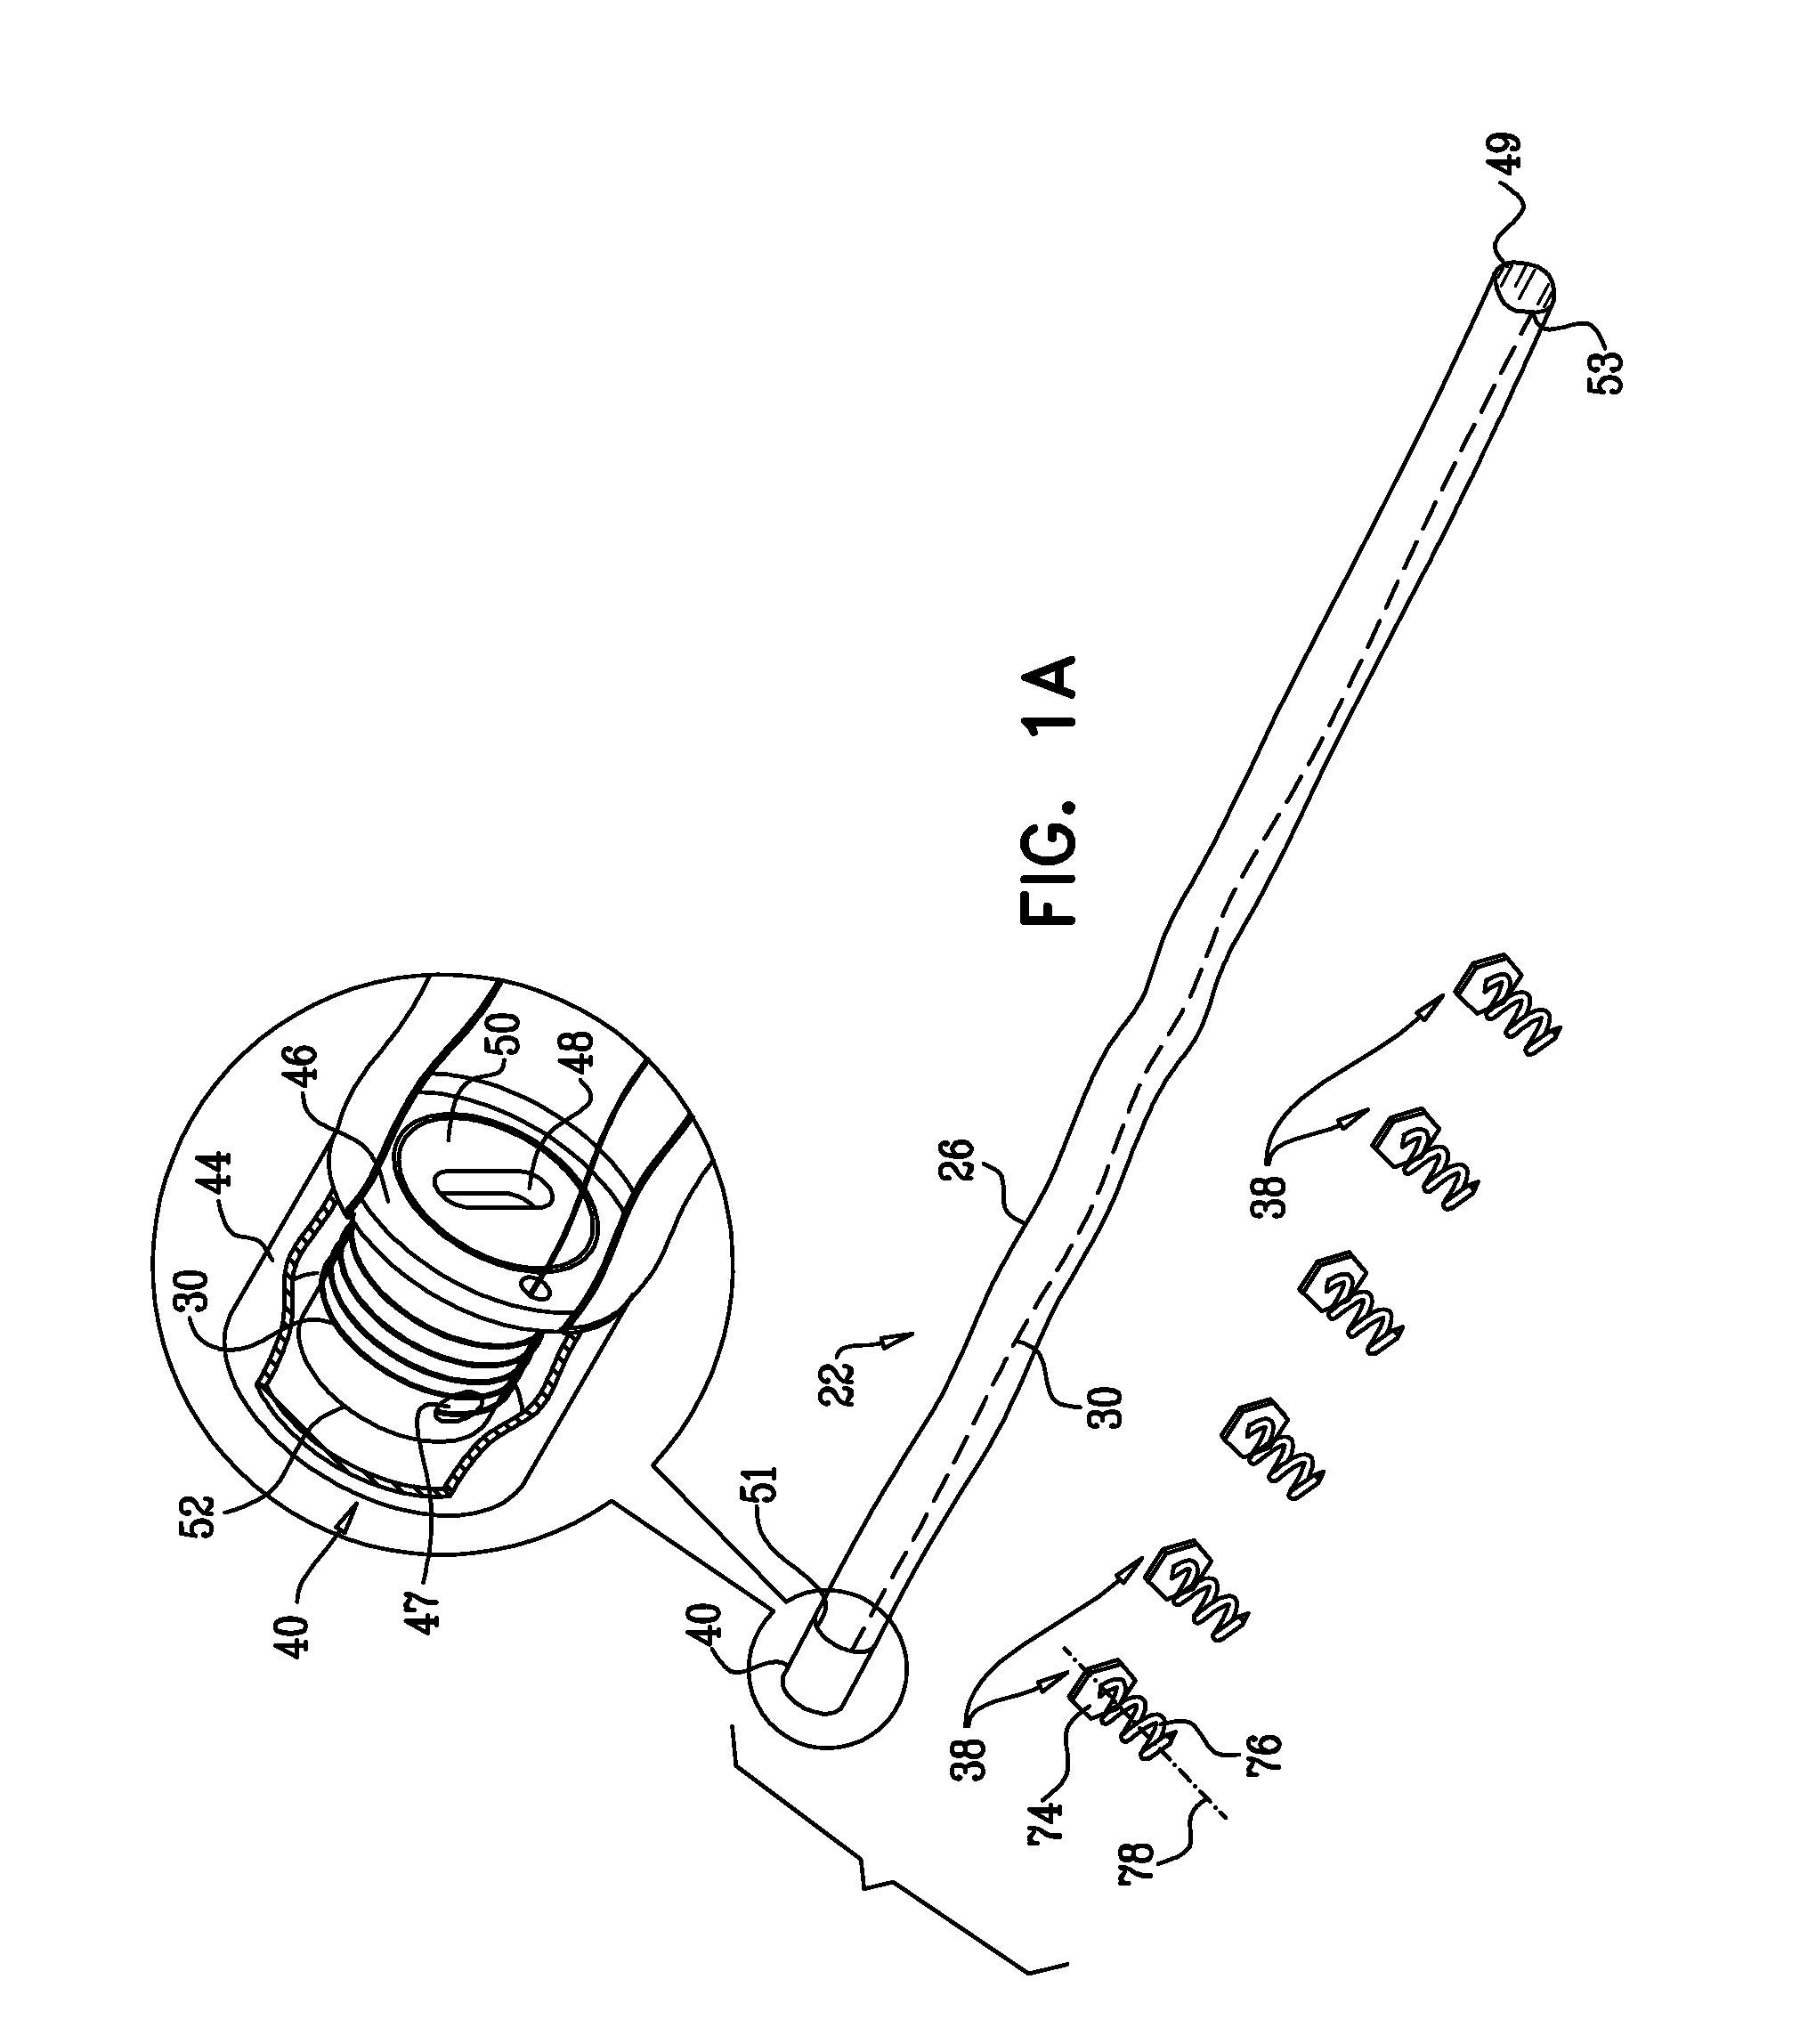 Annuloplasty ring with intra-ring anchoring